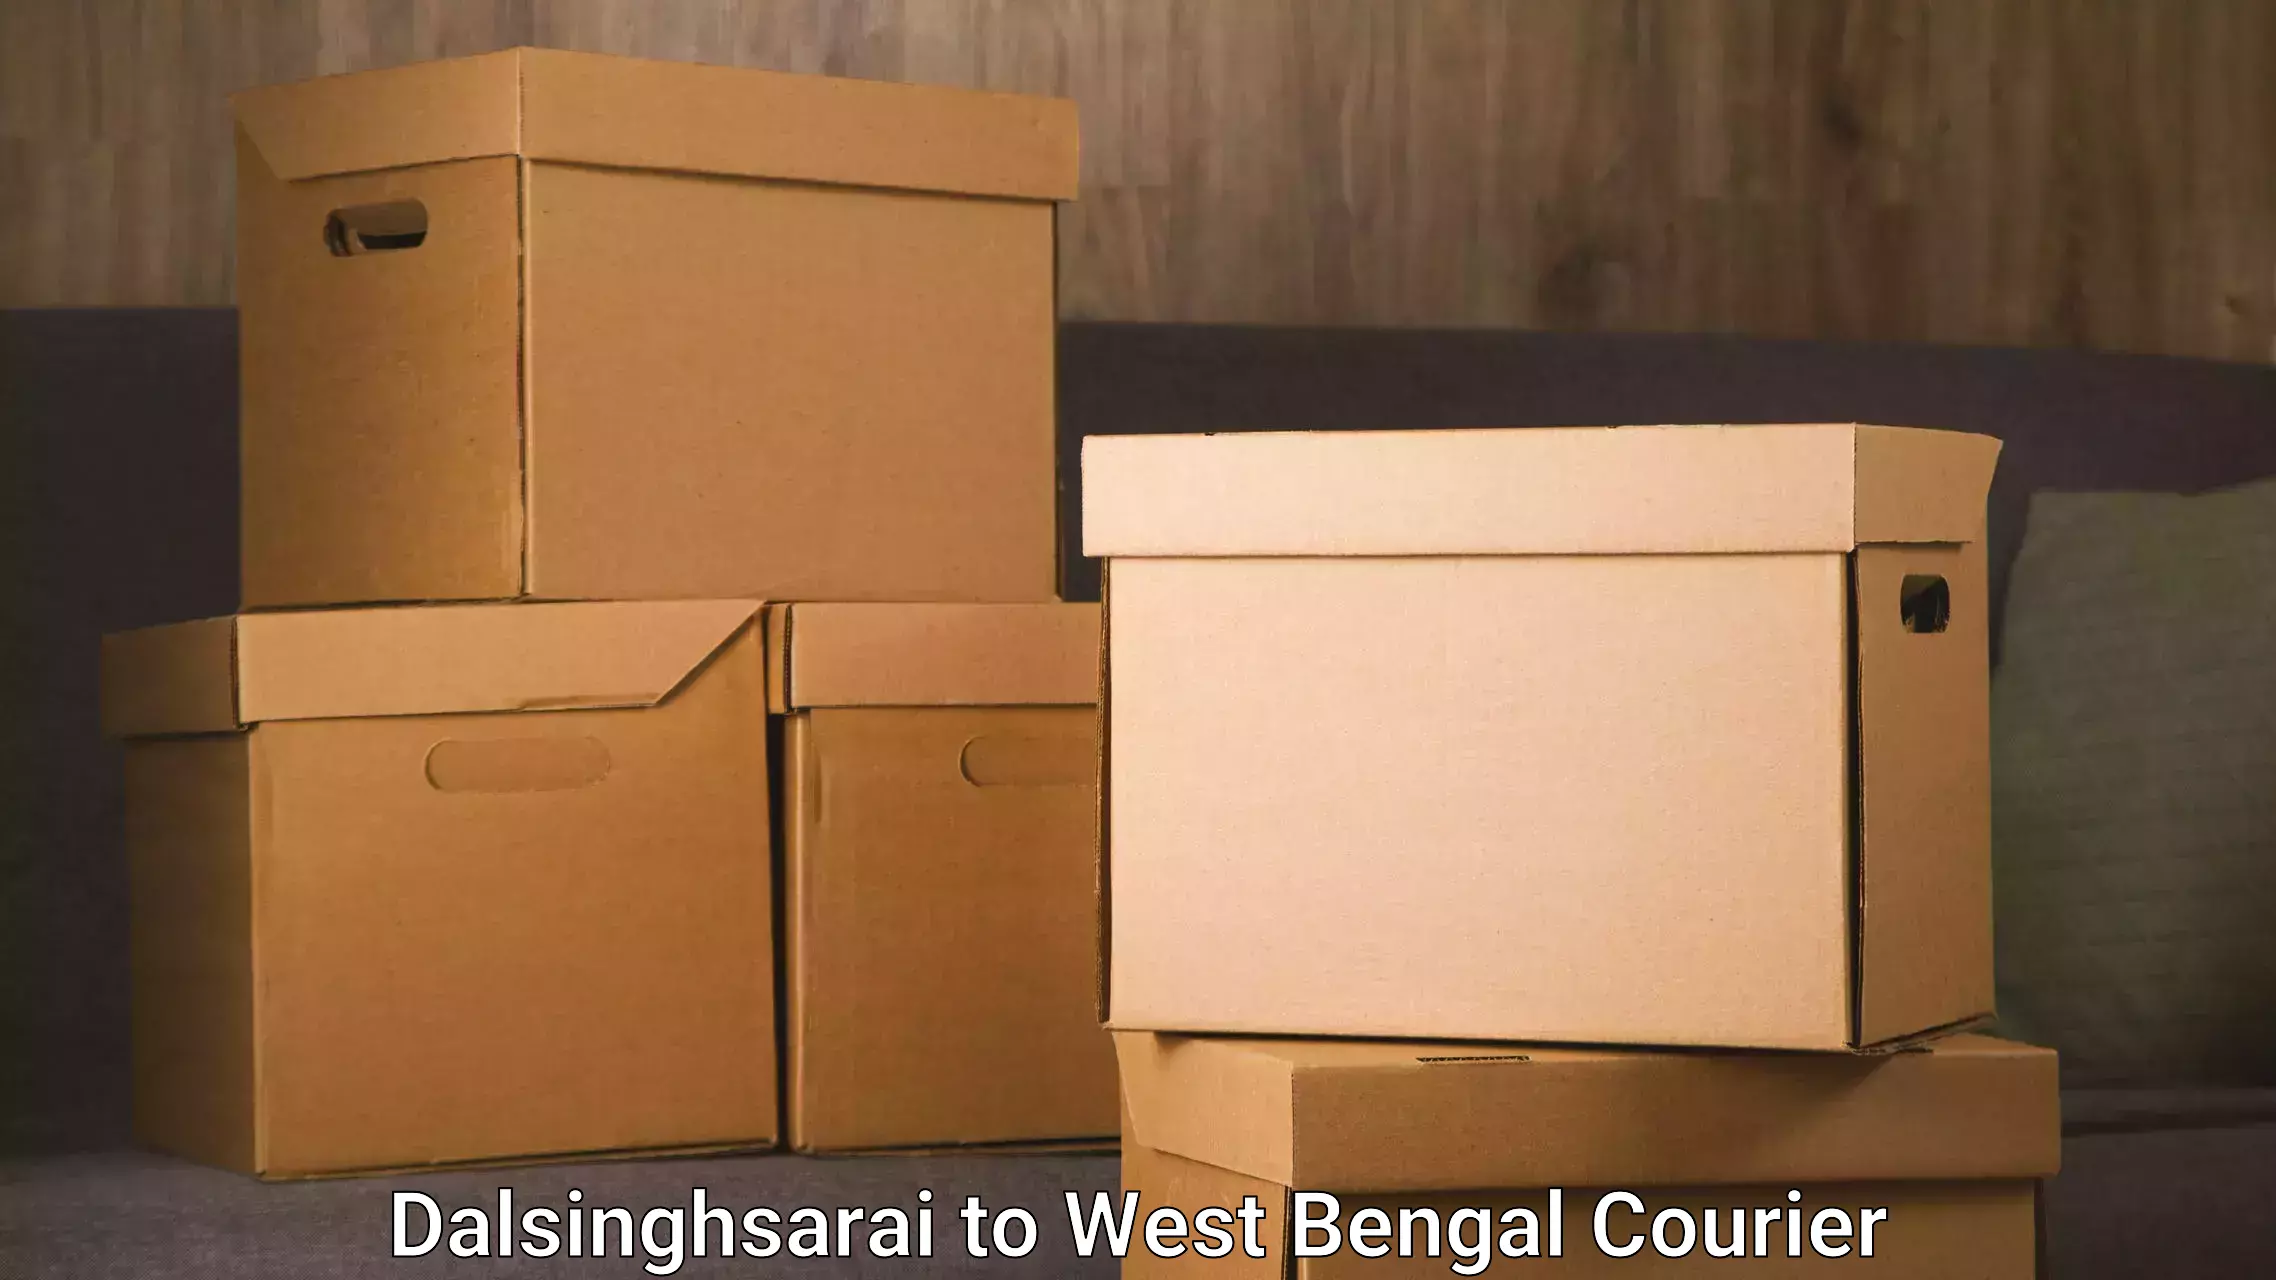 Trusted moving company Dalsinghsarai to Basirhat